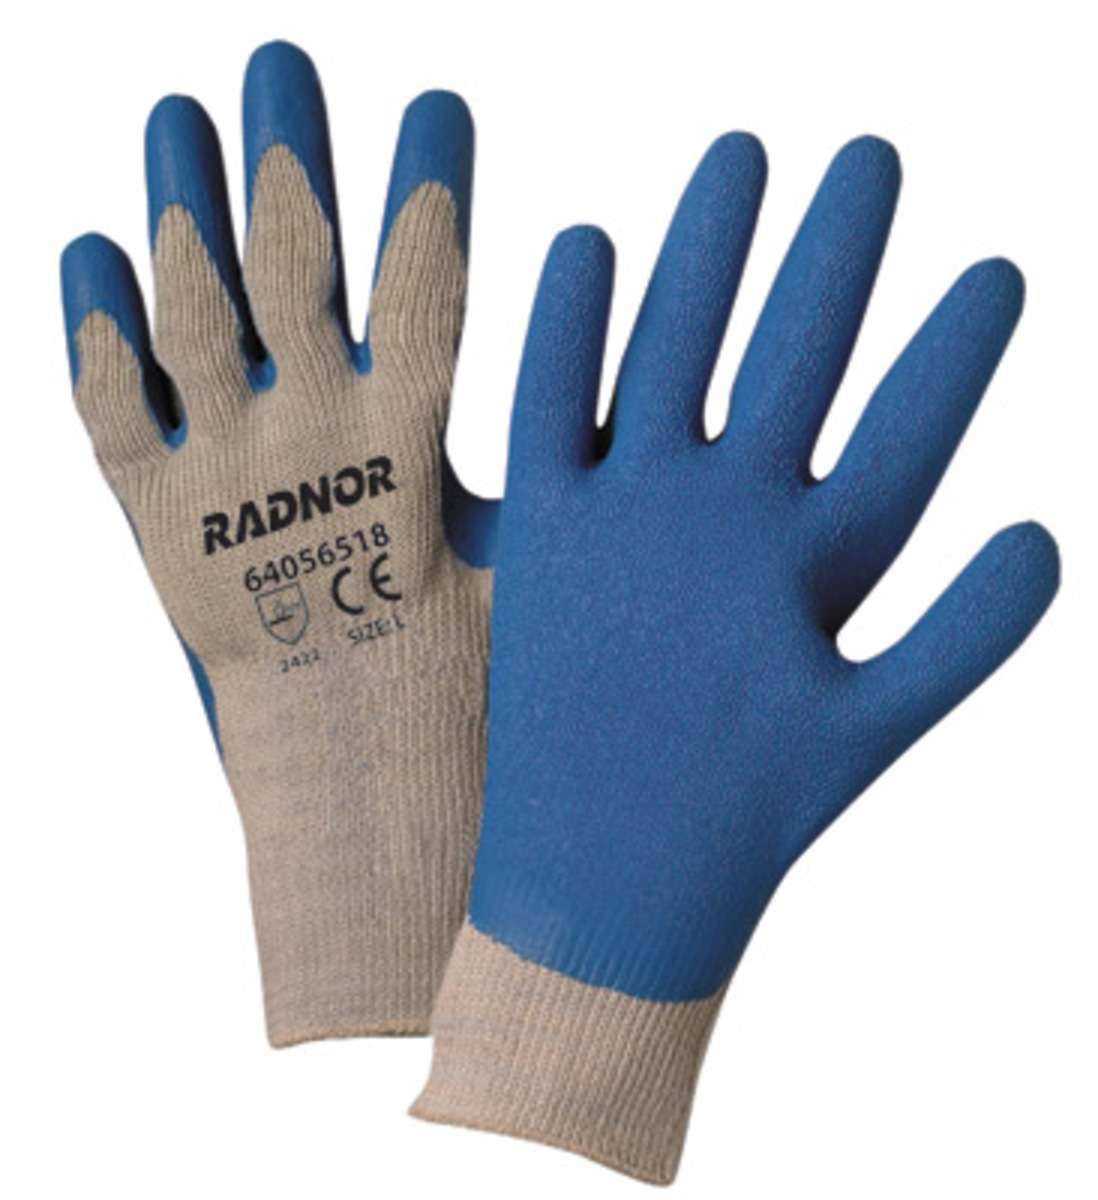 Latex Rubber Coated Palm Work Gloves 5 Pairs of Latex Rubber Coated Palm Gloves 